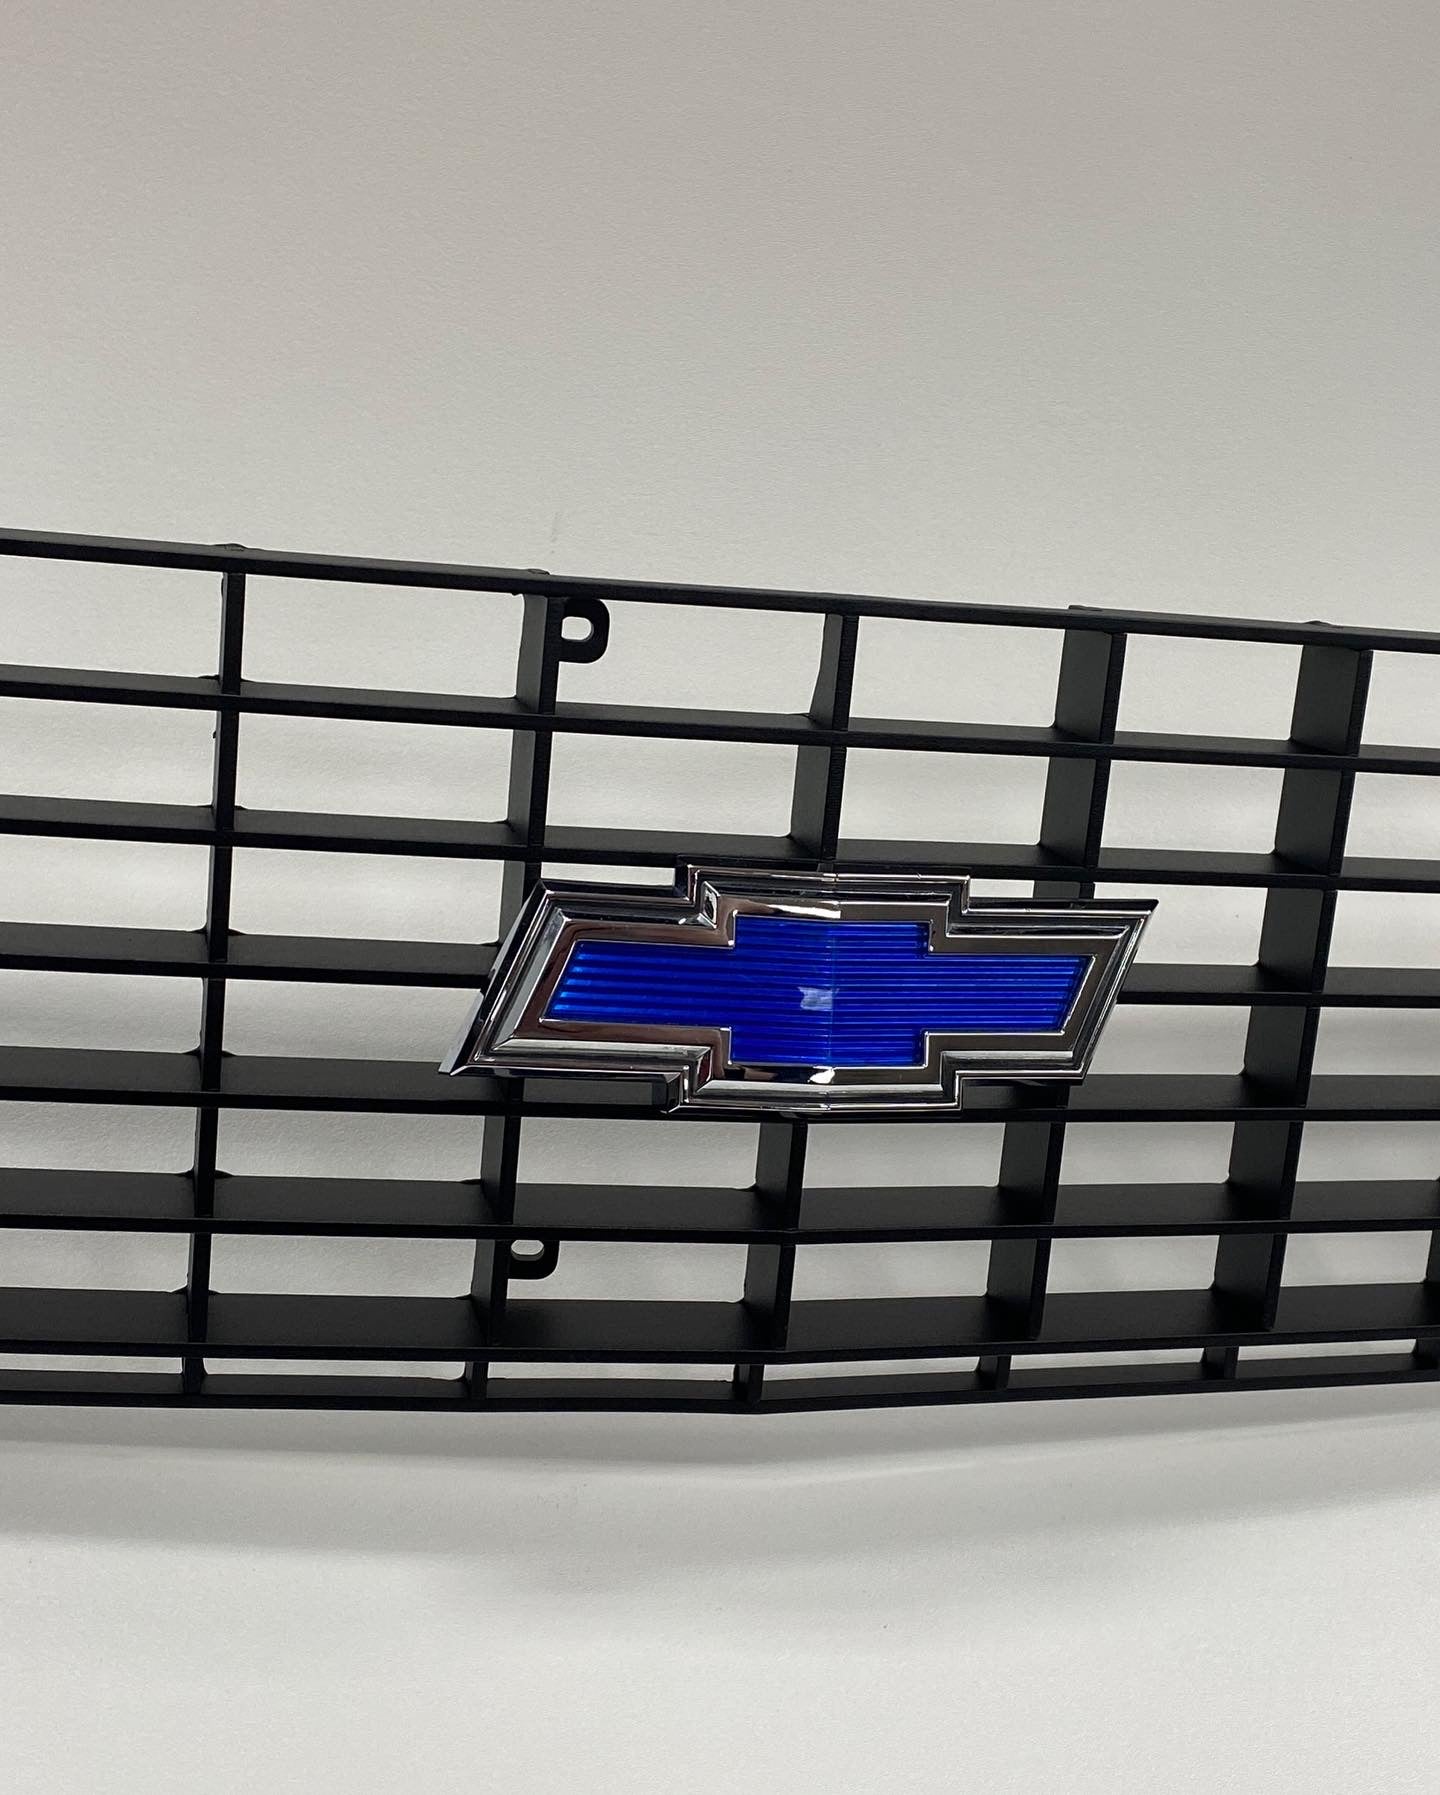 Grille AF (Aluminum Fabricated) 1971-72 Chevrolet Truck